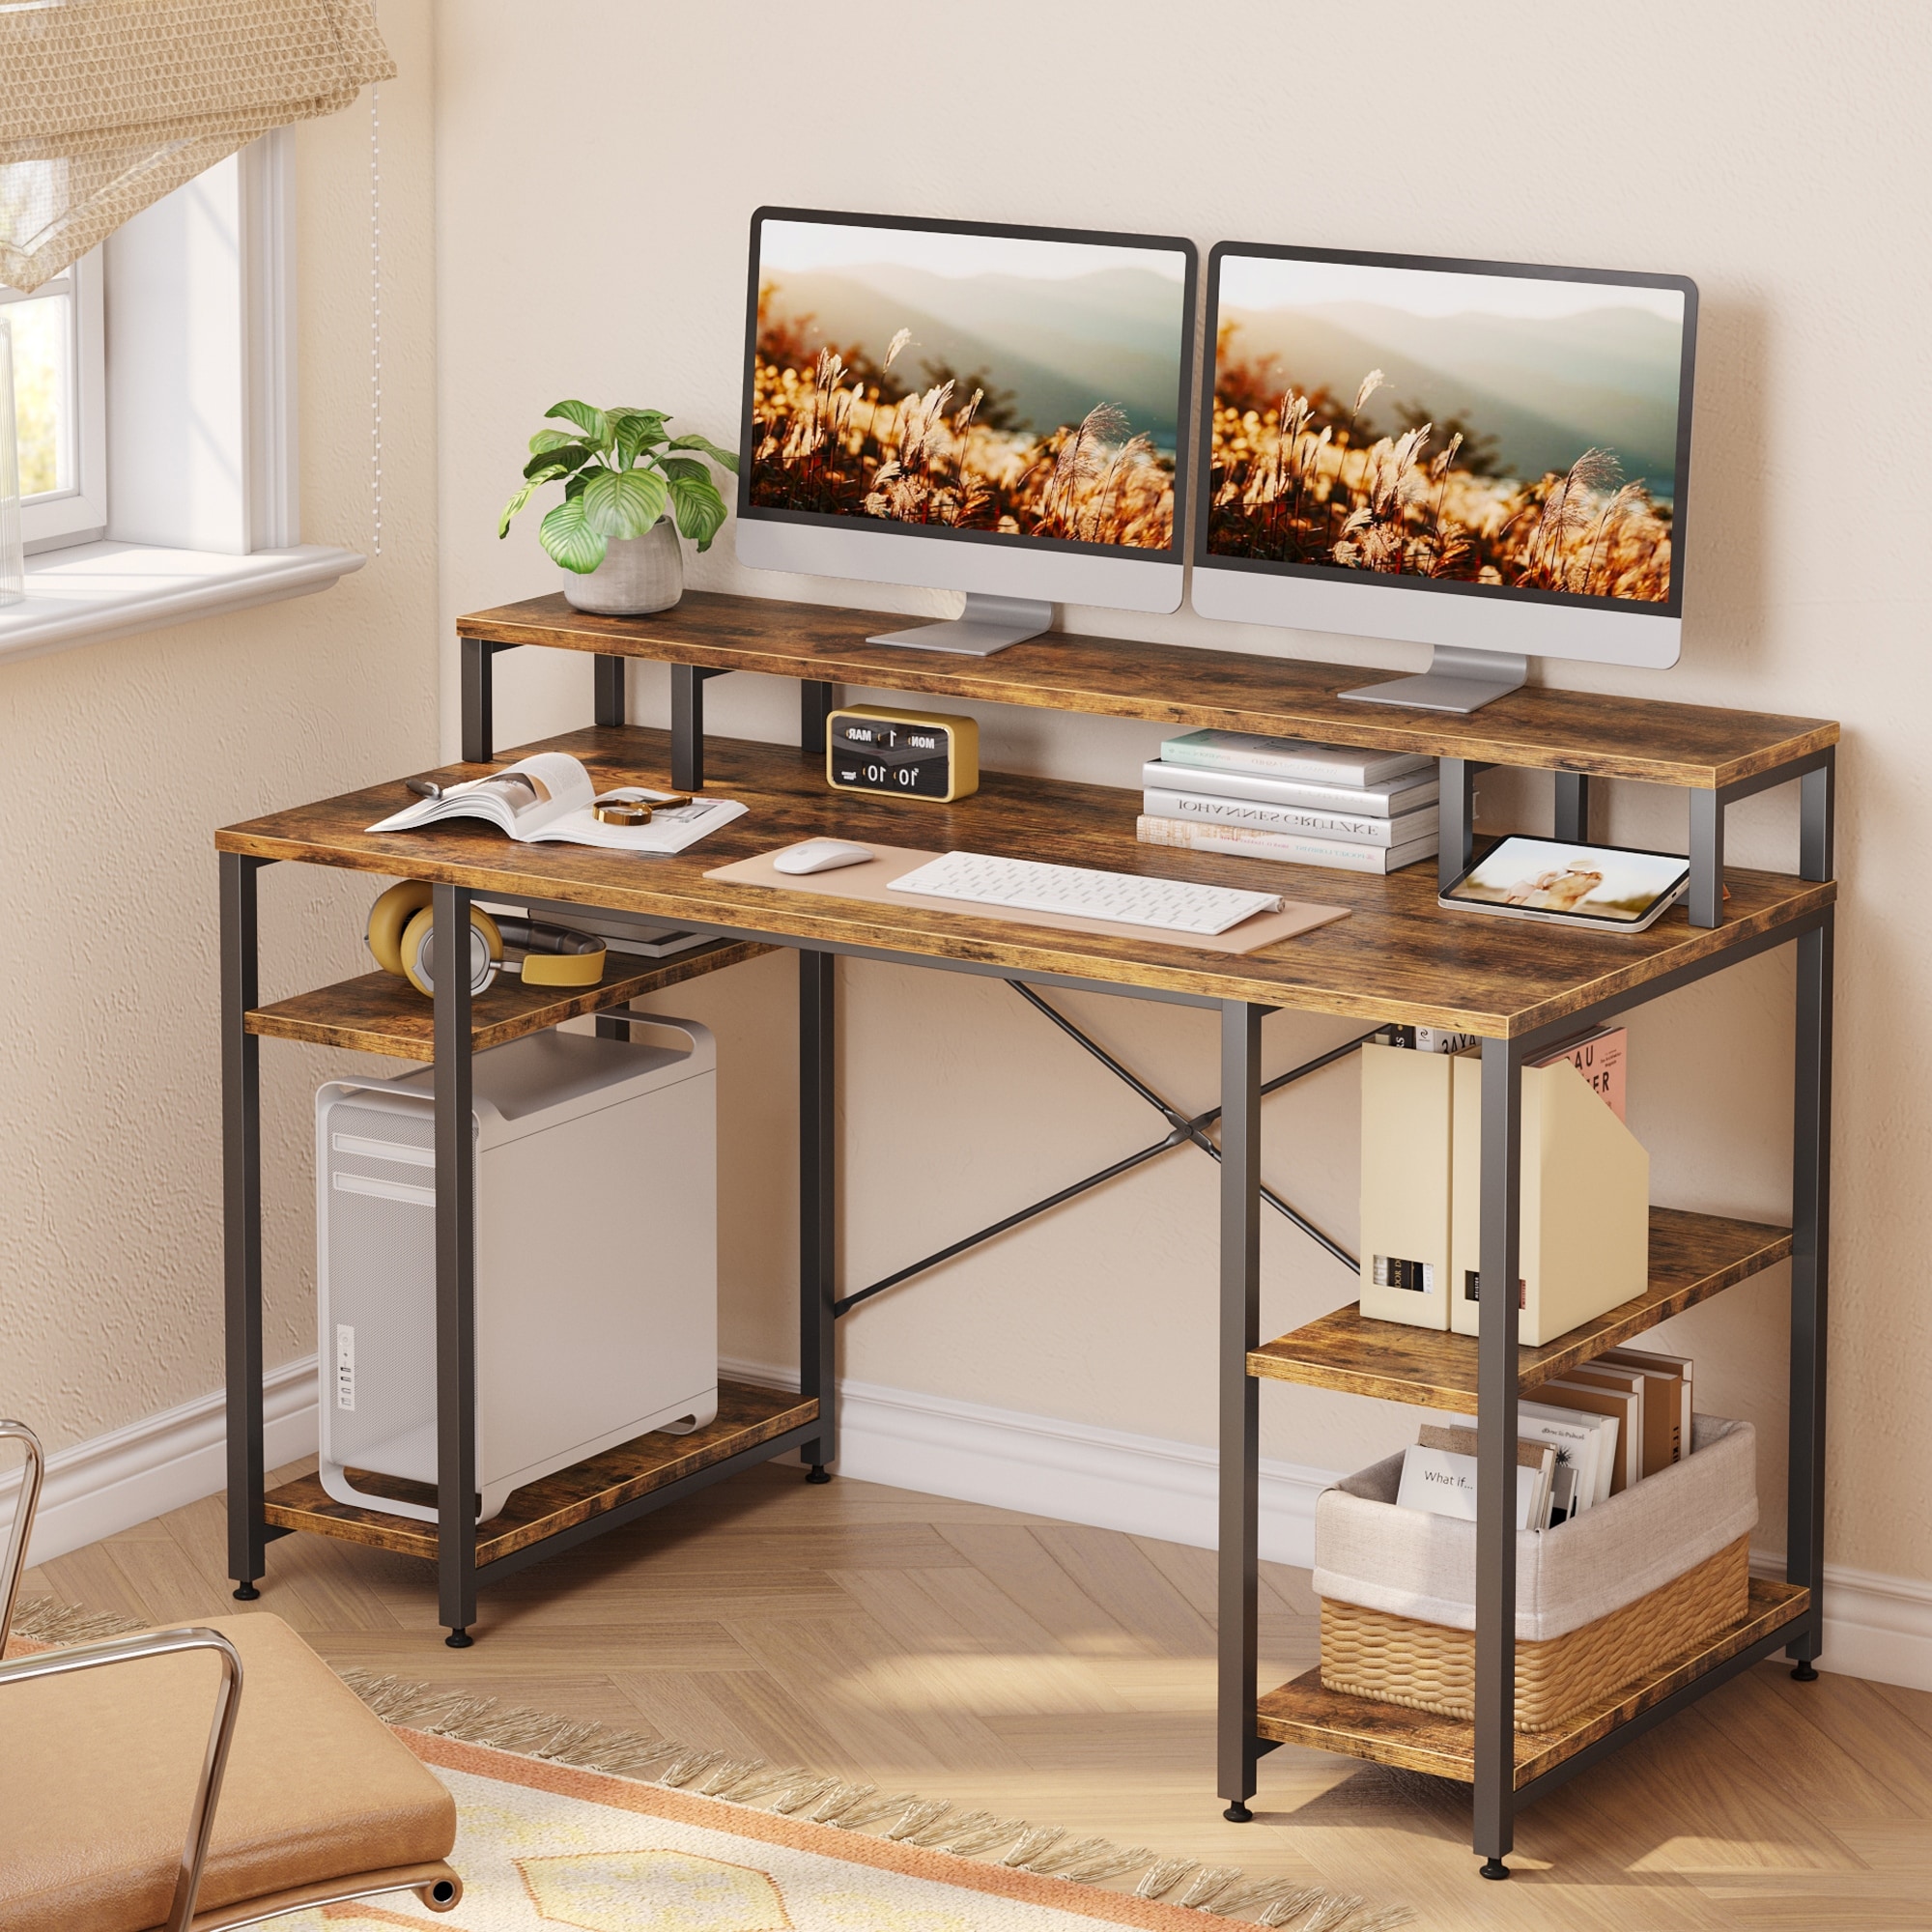 https://ak1.ostkcdn.com/images/products/is/images/direct/630346326be202ddf6ce7a843270ffcc65636a42/55-Inch-Dual-Monitor-Computer-Desk-with-Adjustable-Shelves.jpg